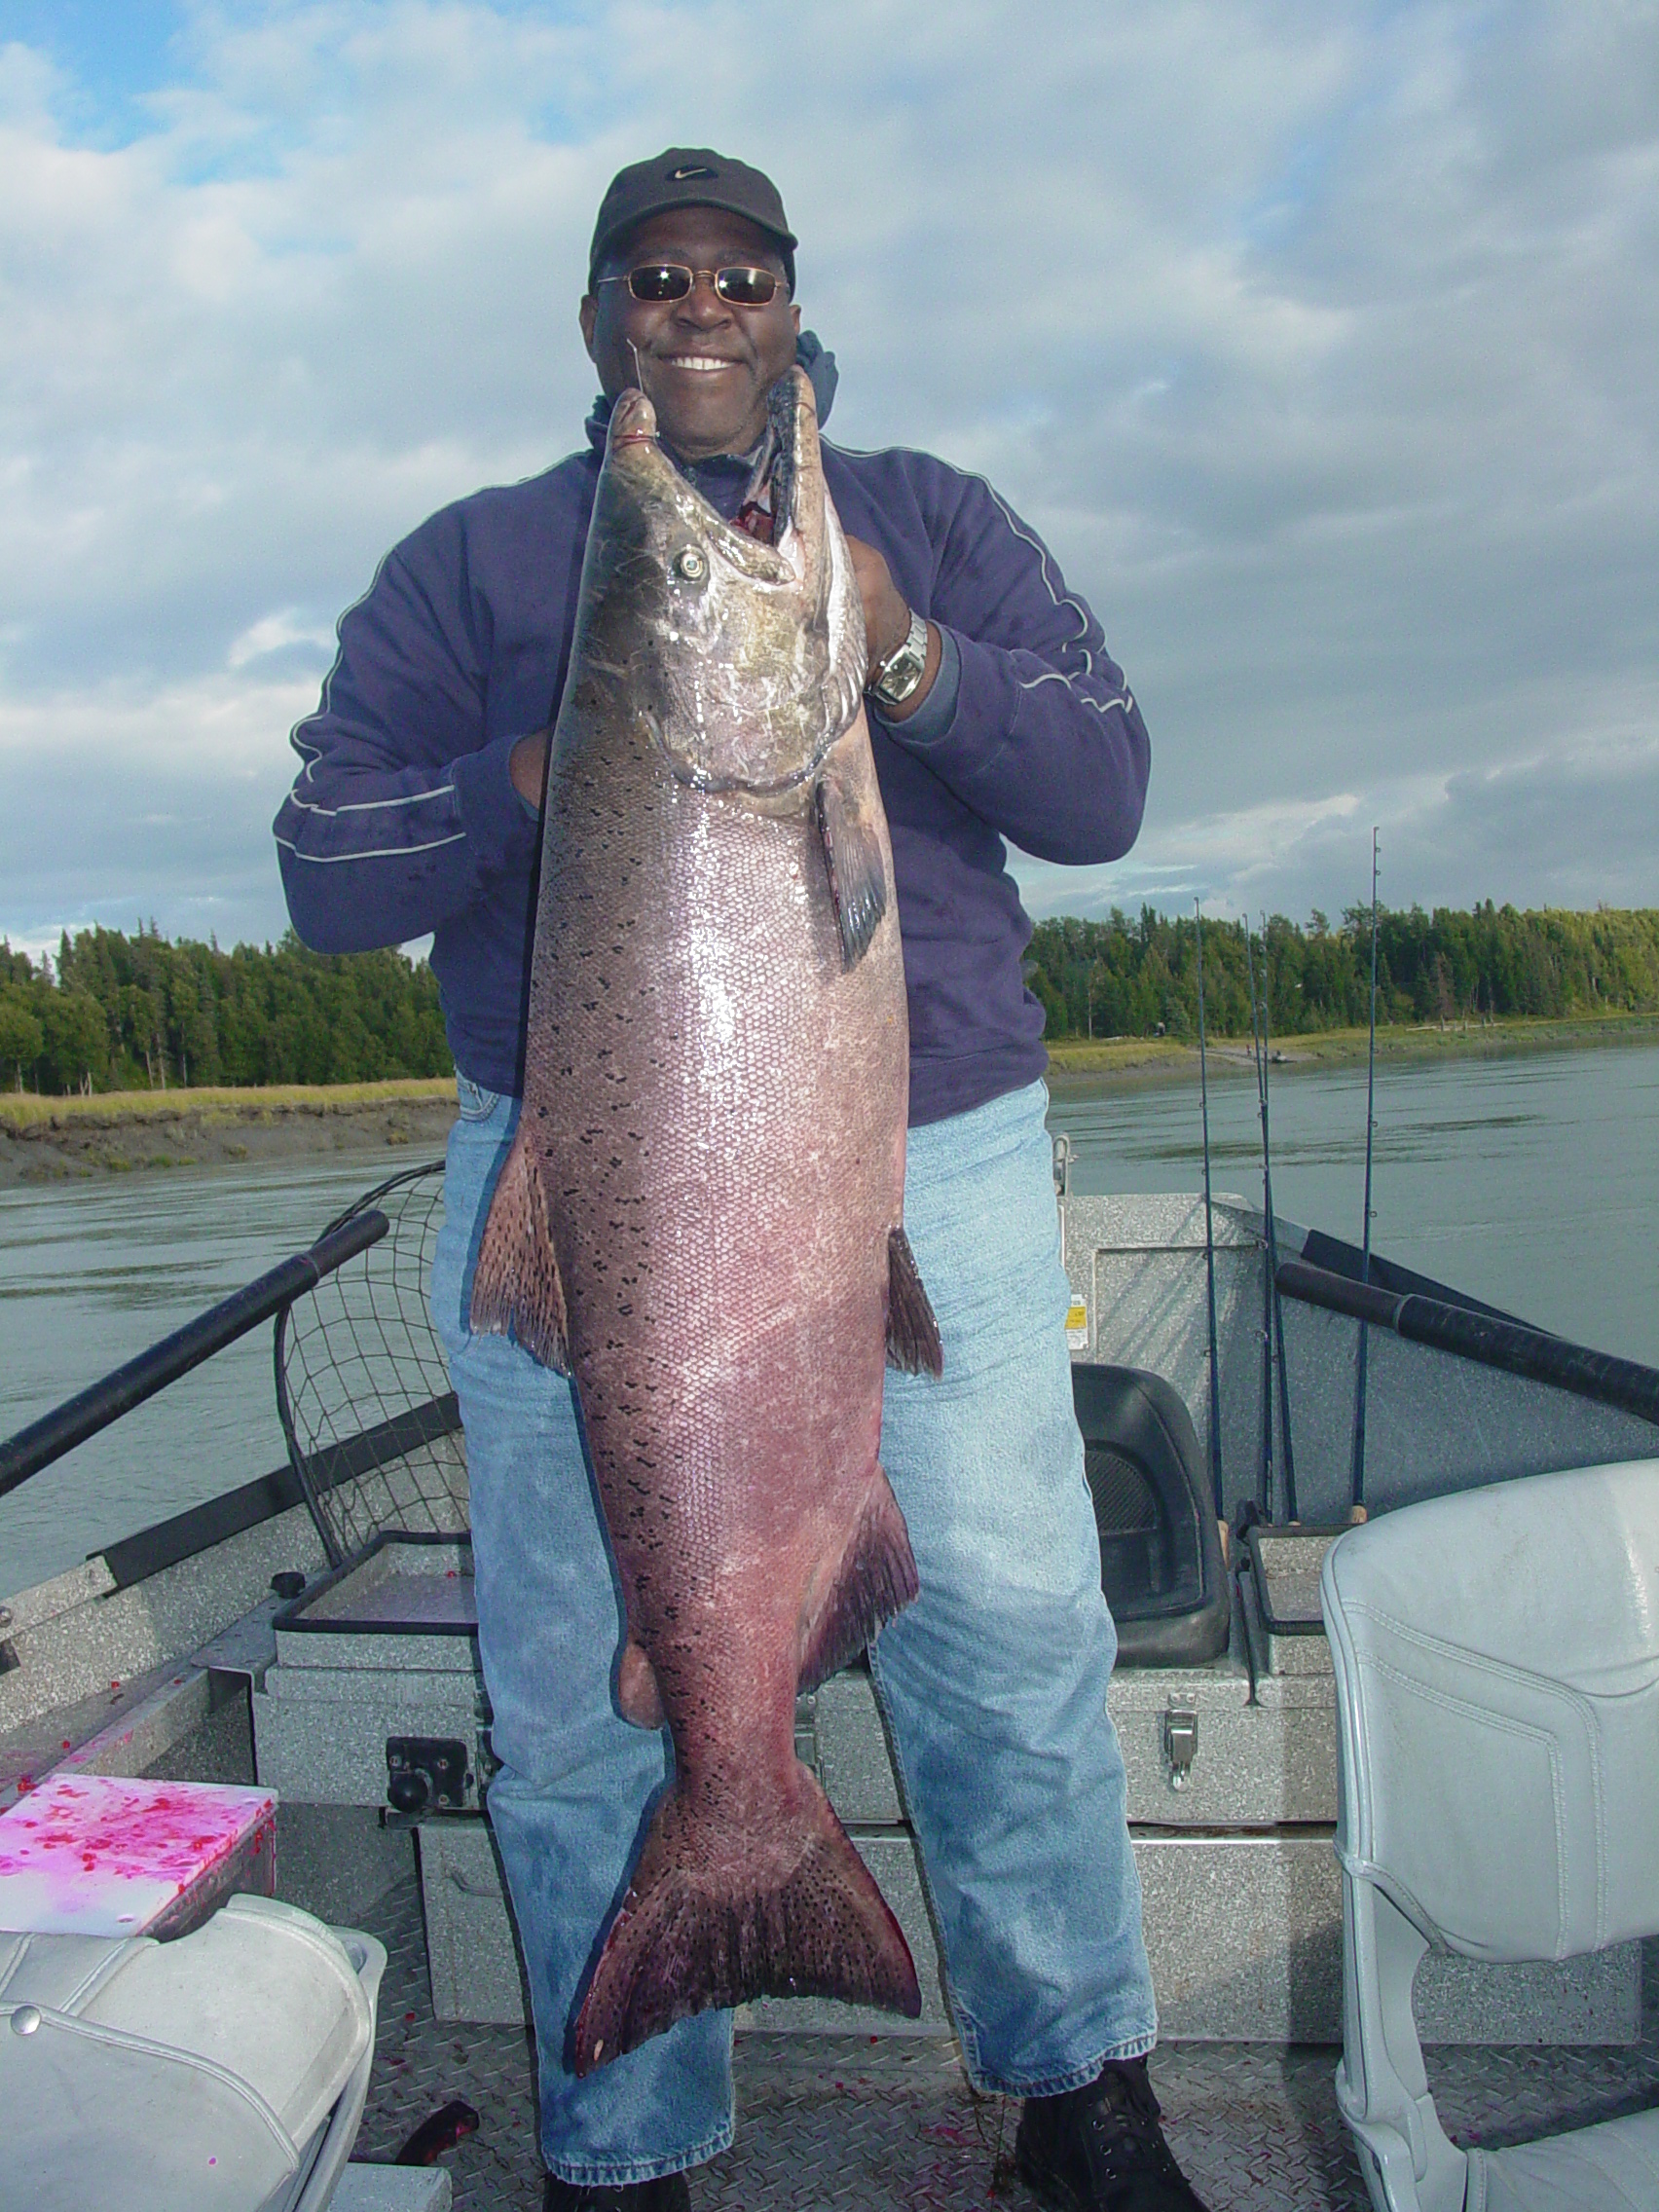 A long-time guest in our WA fisheries, Clyde pays us a visit on the Kasilof.